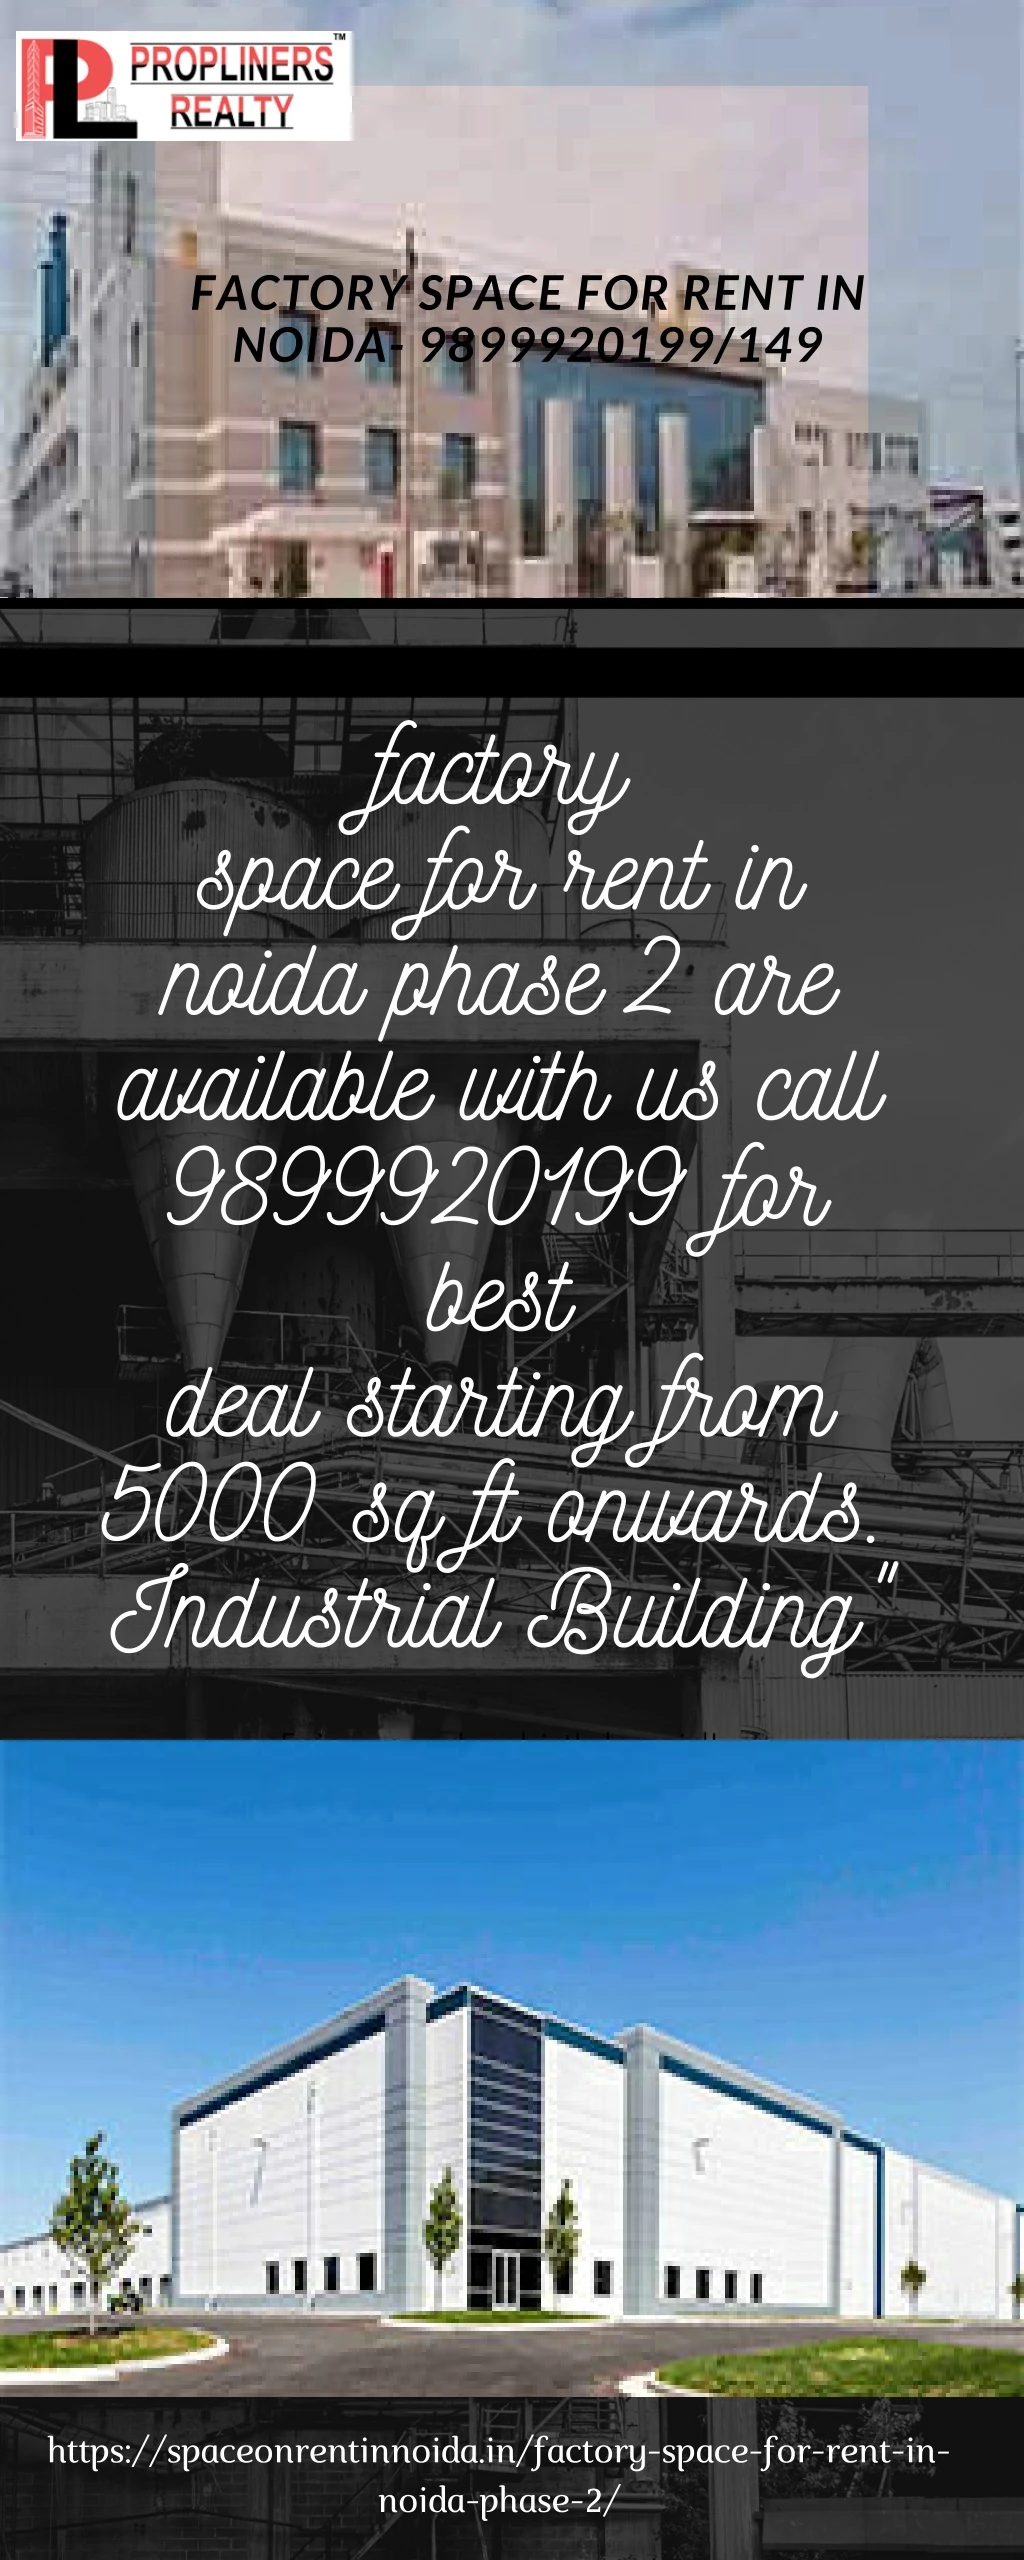 factory space for rent in noida 9899920199 149